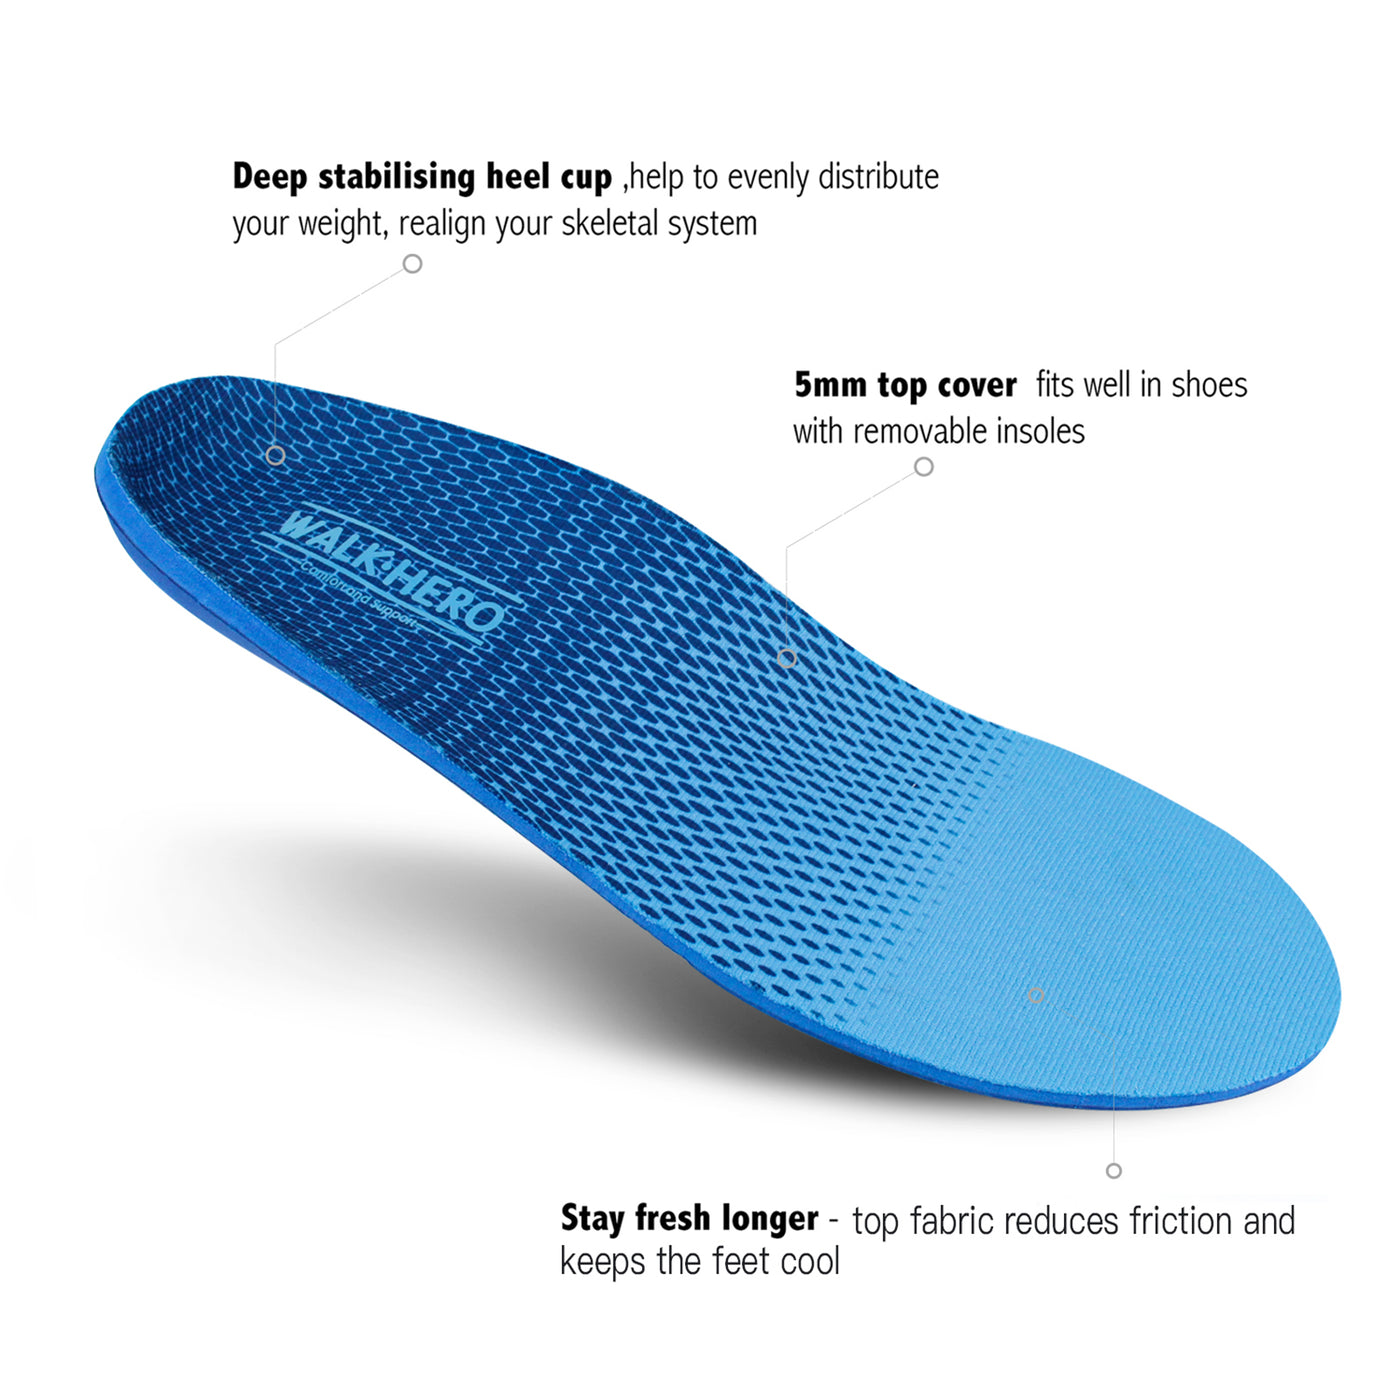 WALKHERO Women's Arch Support Orthotic Insoles New Blue